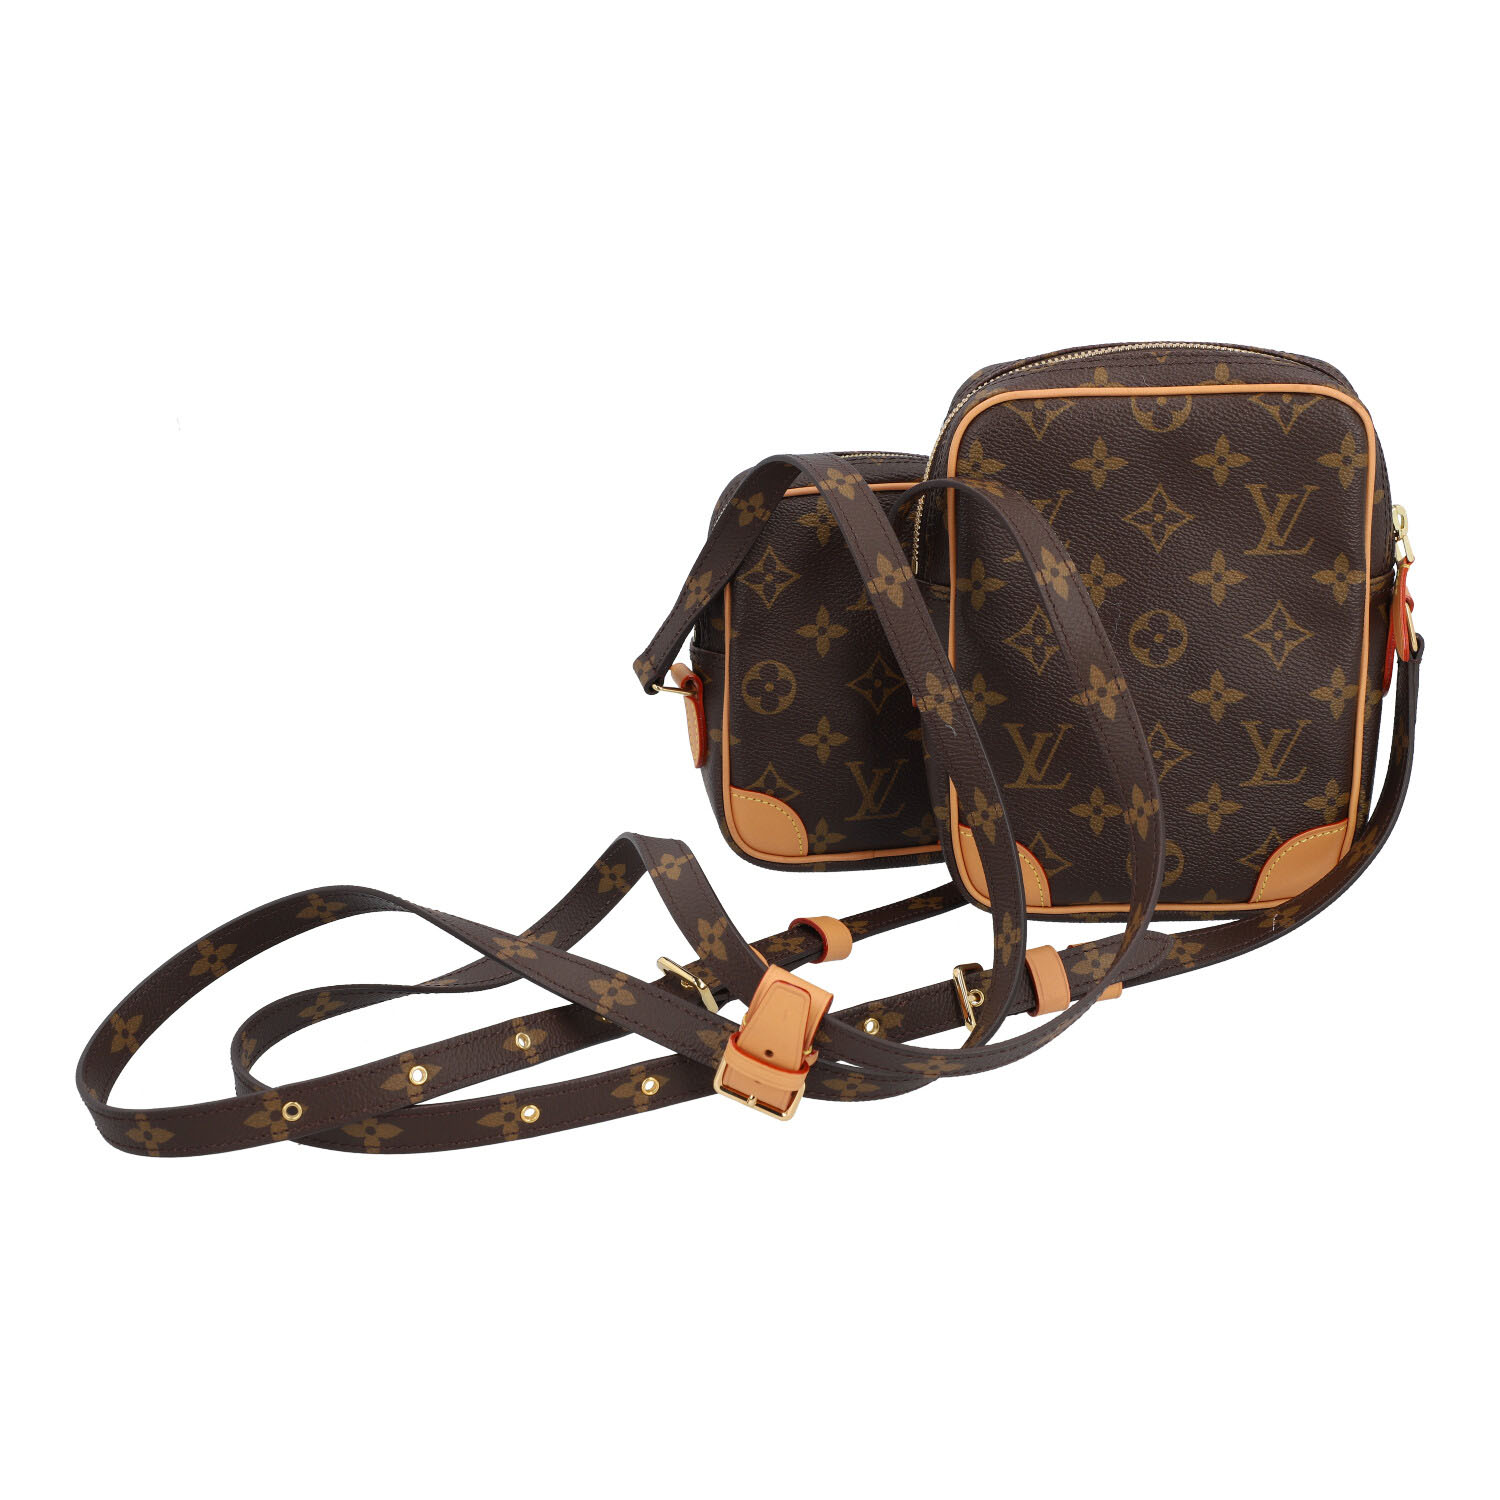 LOUIS VUITTON Umhängetasche "GAME ON PANAME". - Image 4 of 9